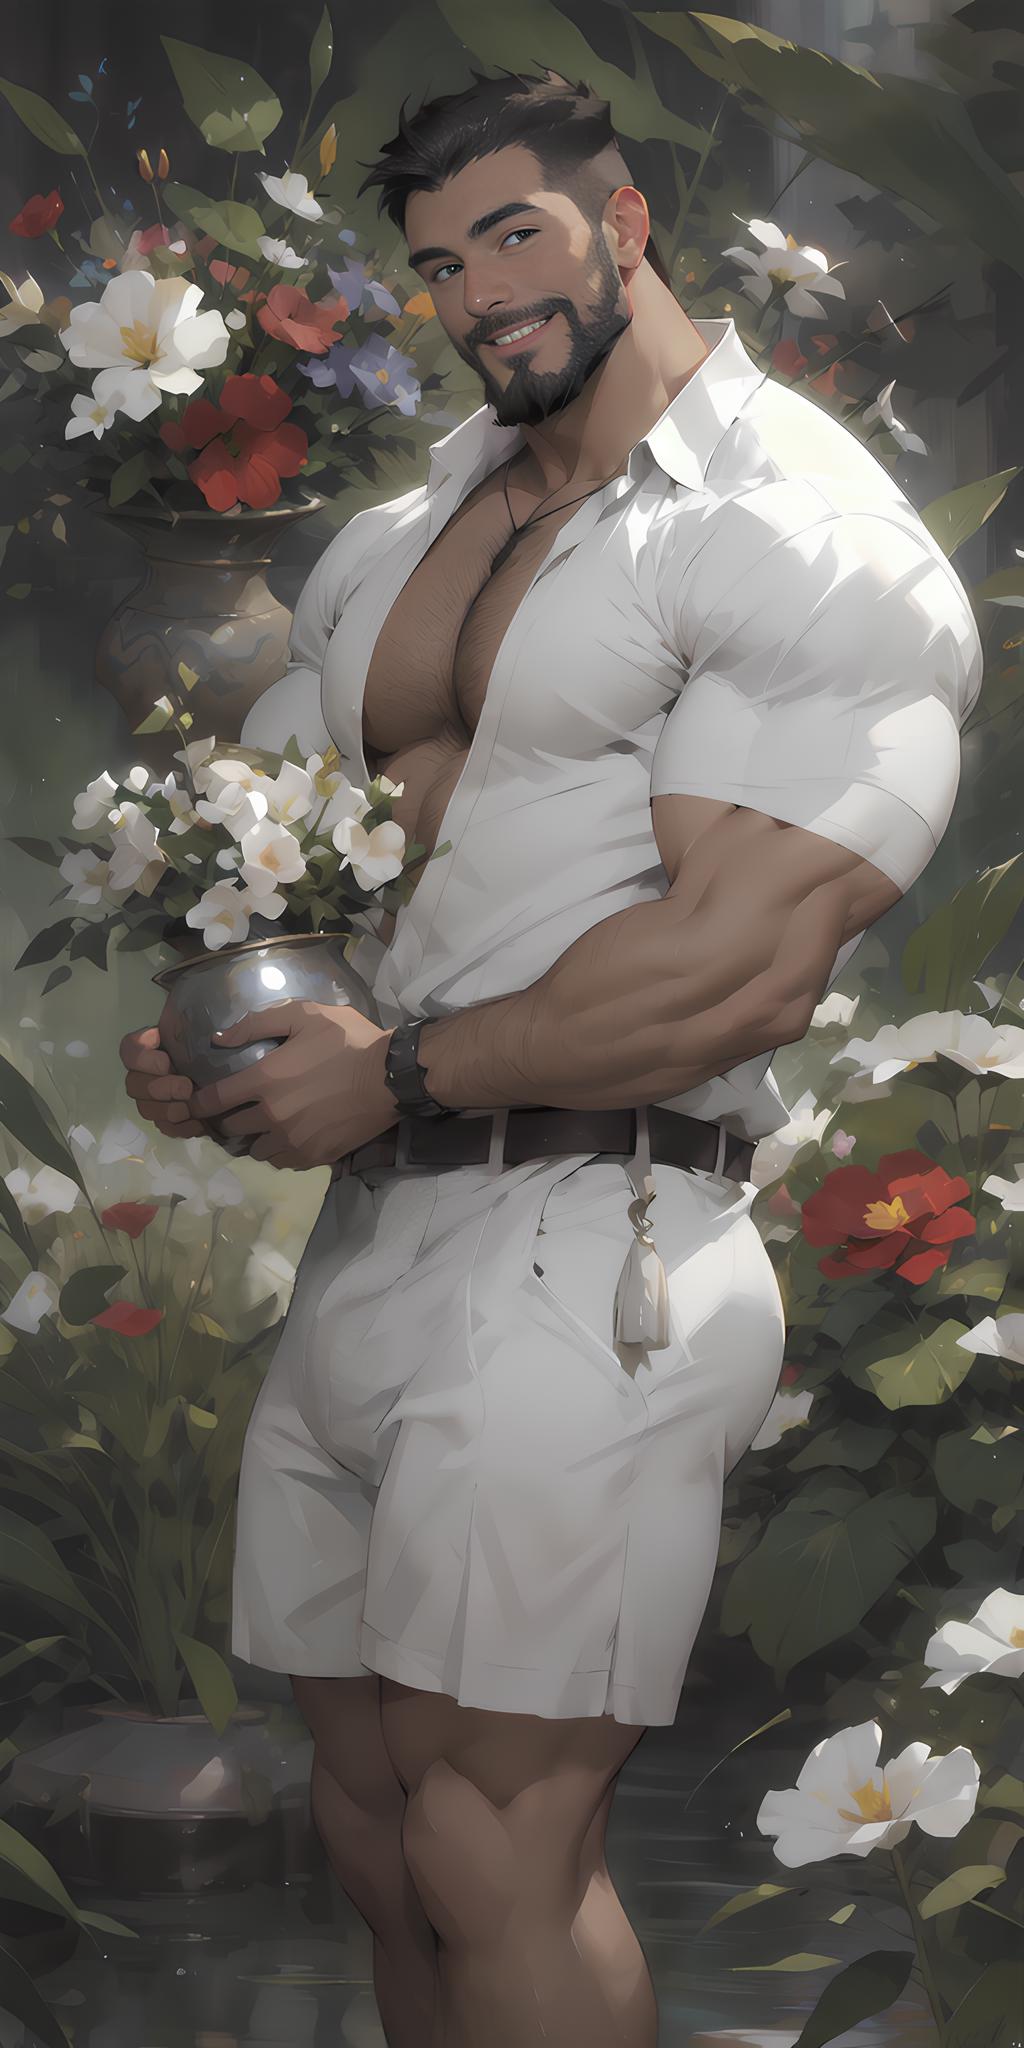 A muscular man holding a vase of flowers.